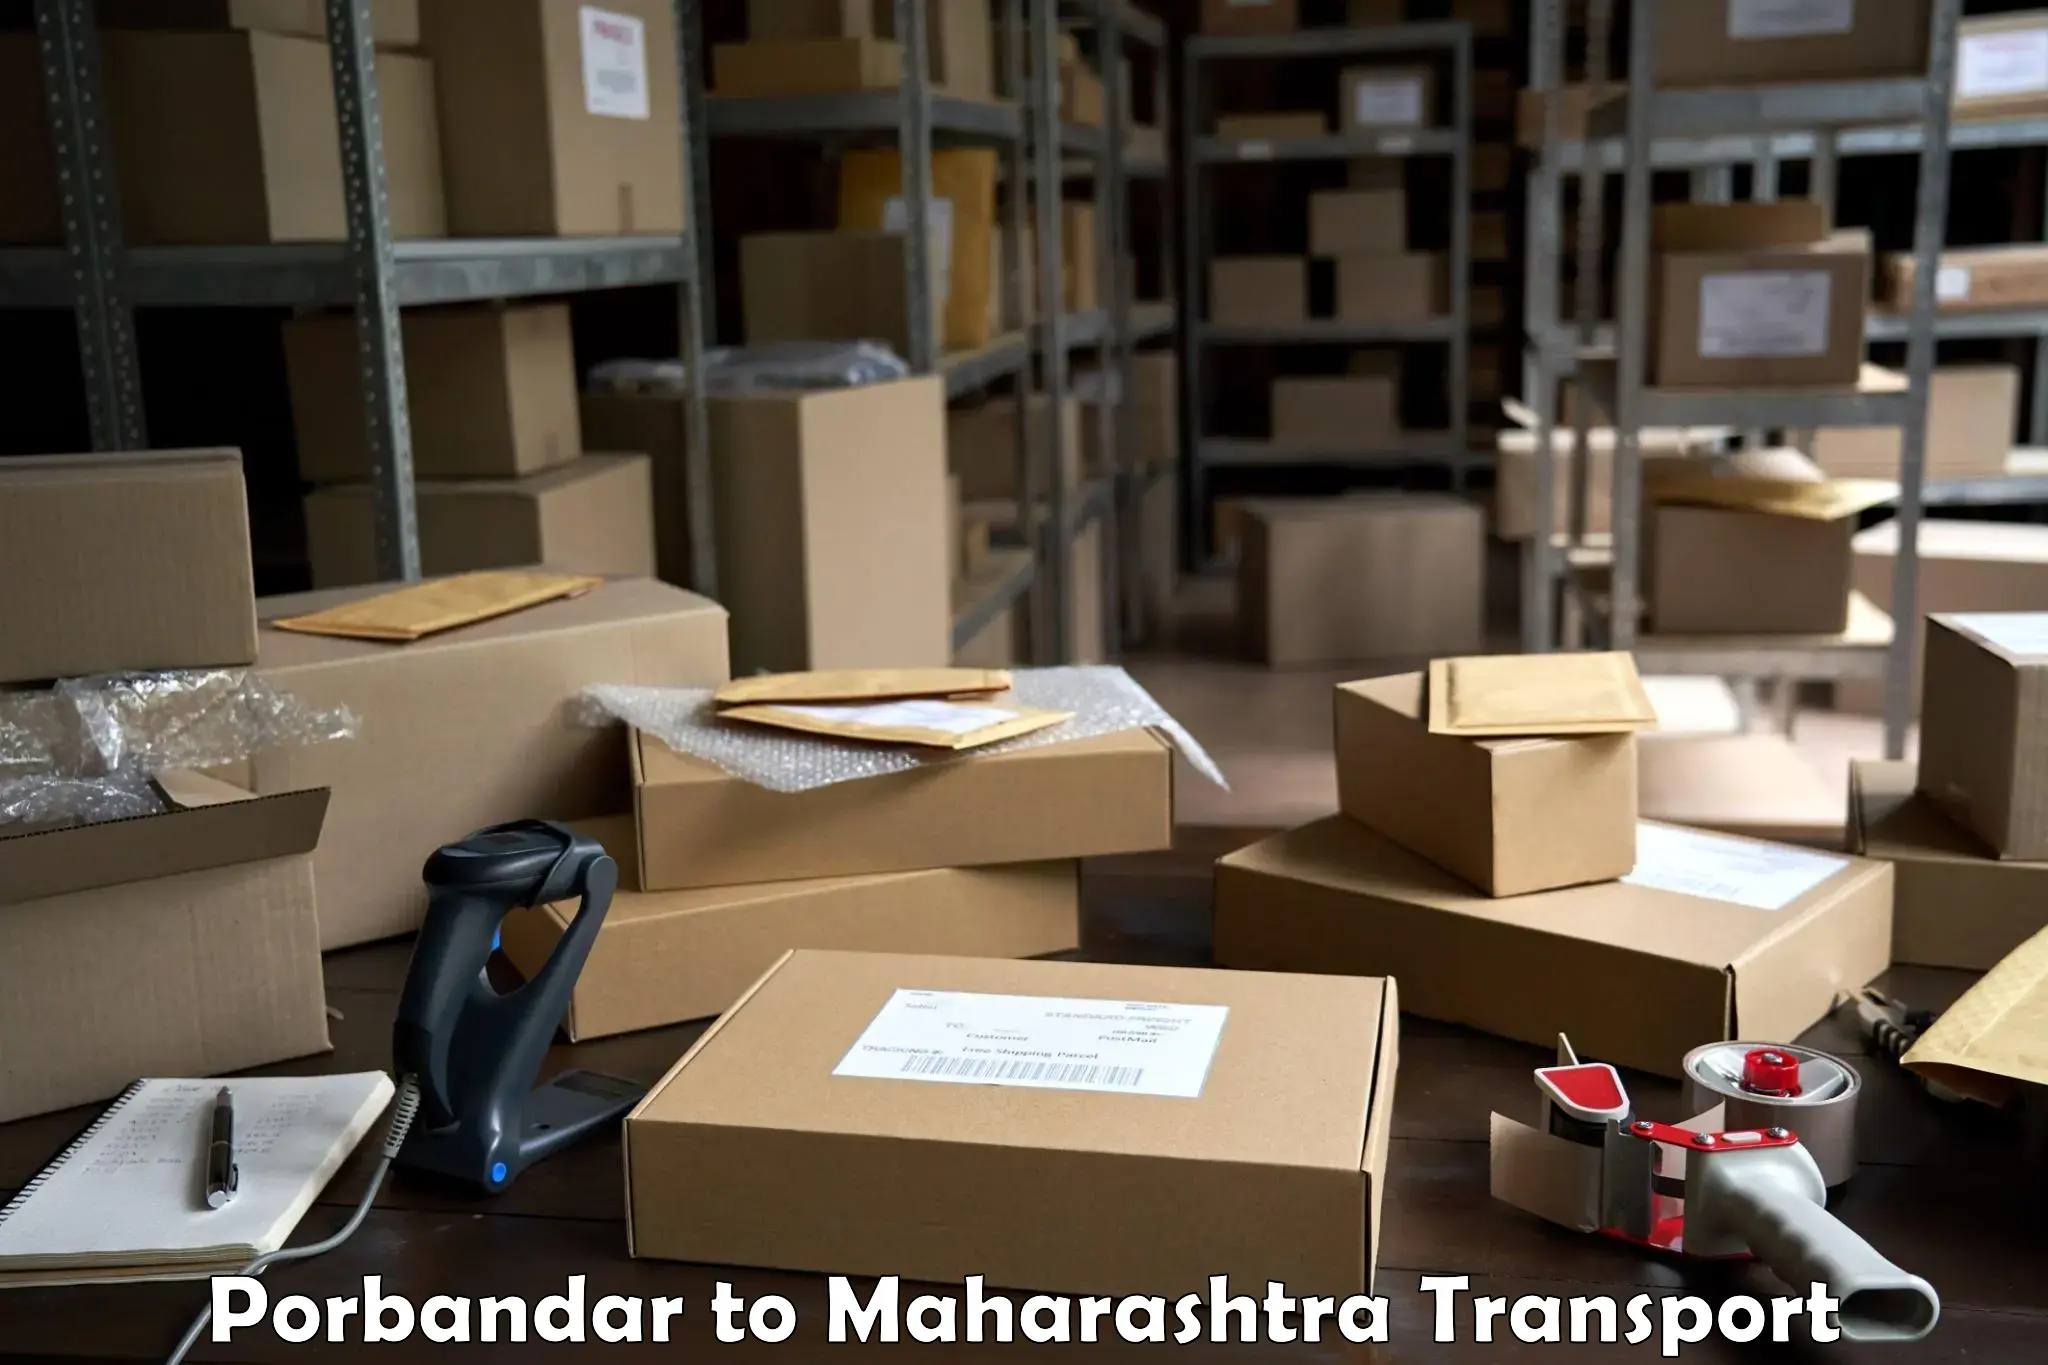 Daily parcel service transport Porbandar to Dharmabad